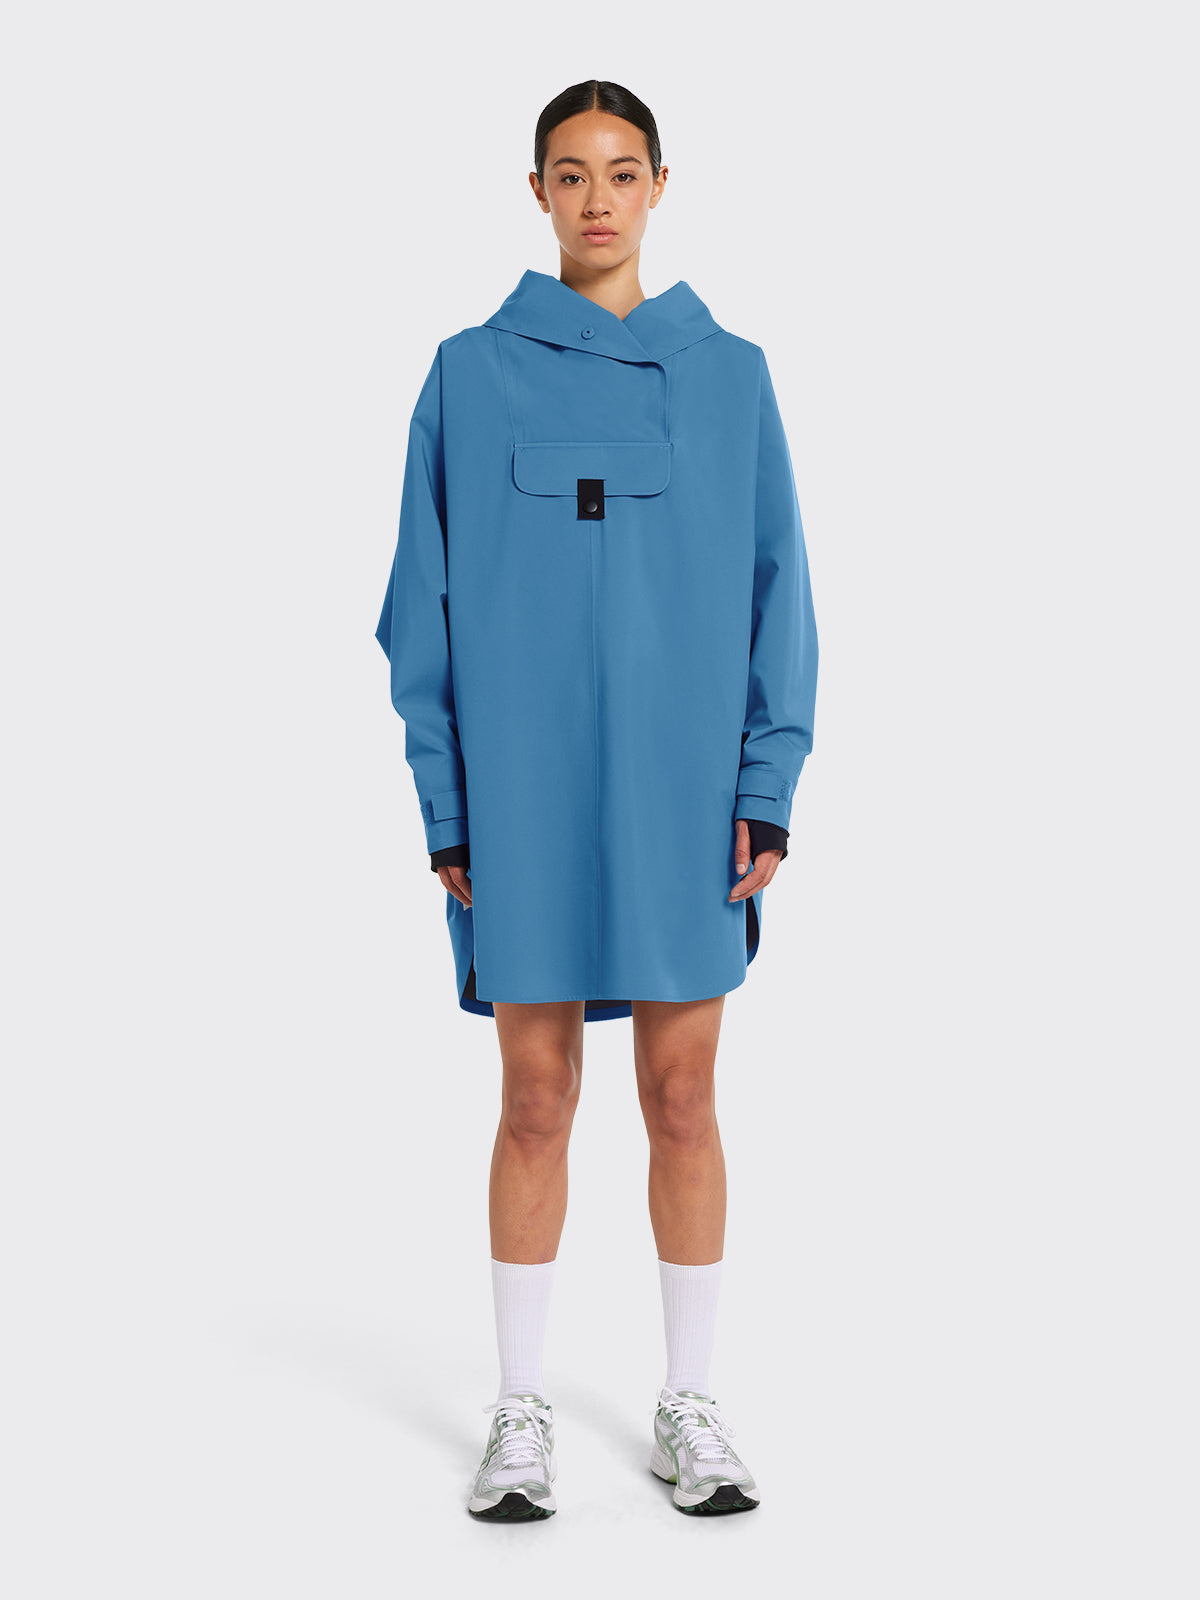 Model wearing Bergen poncho by Blæst in the color Coronet Blue